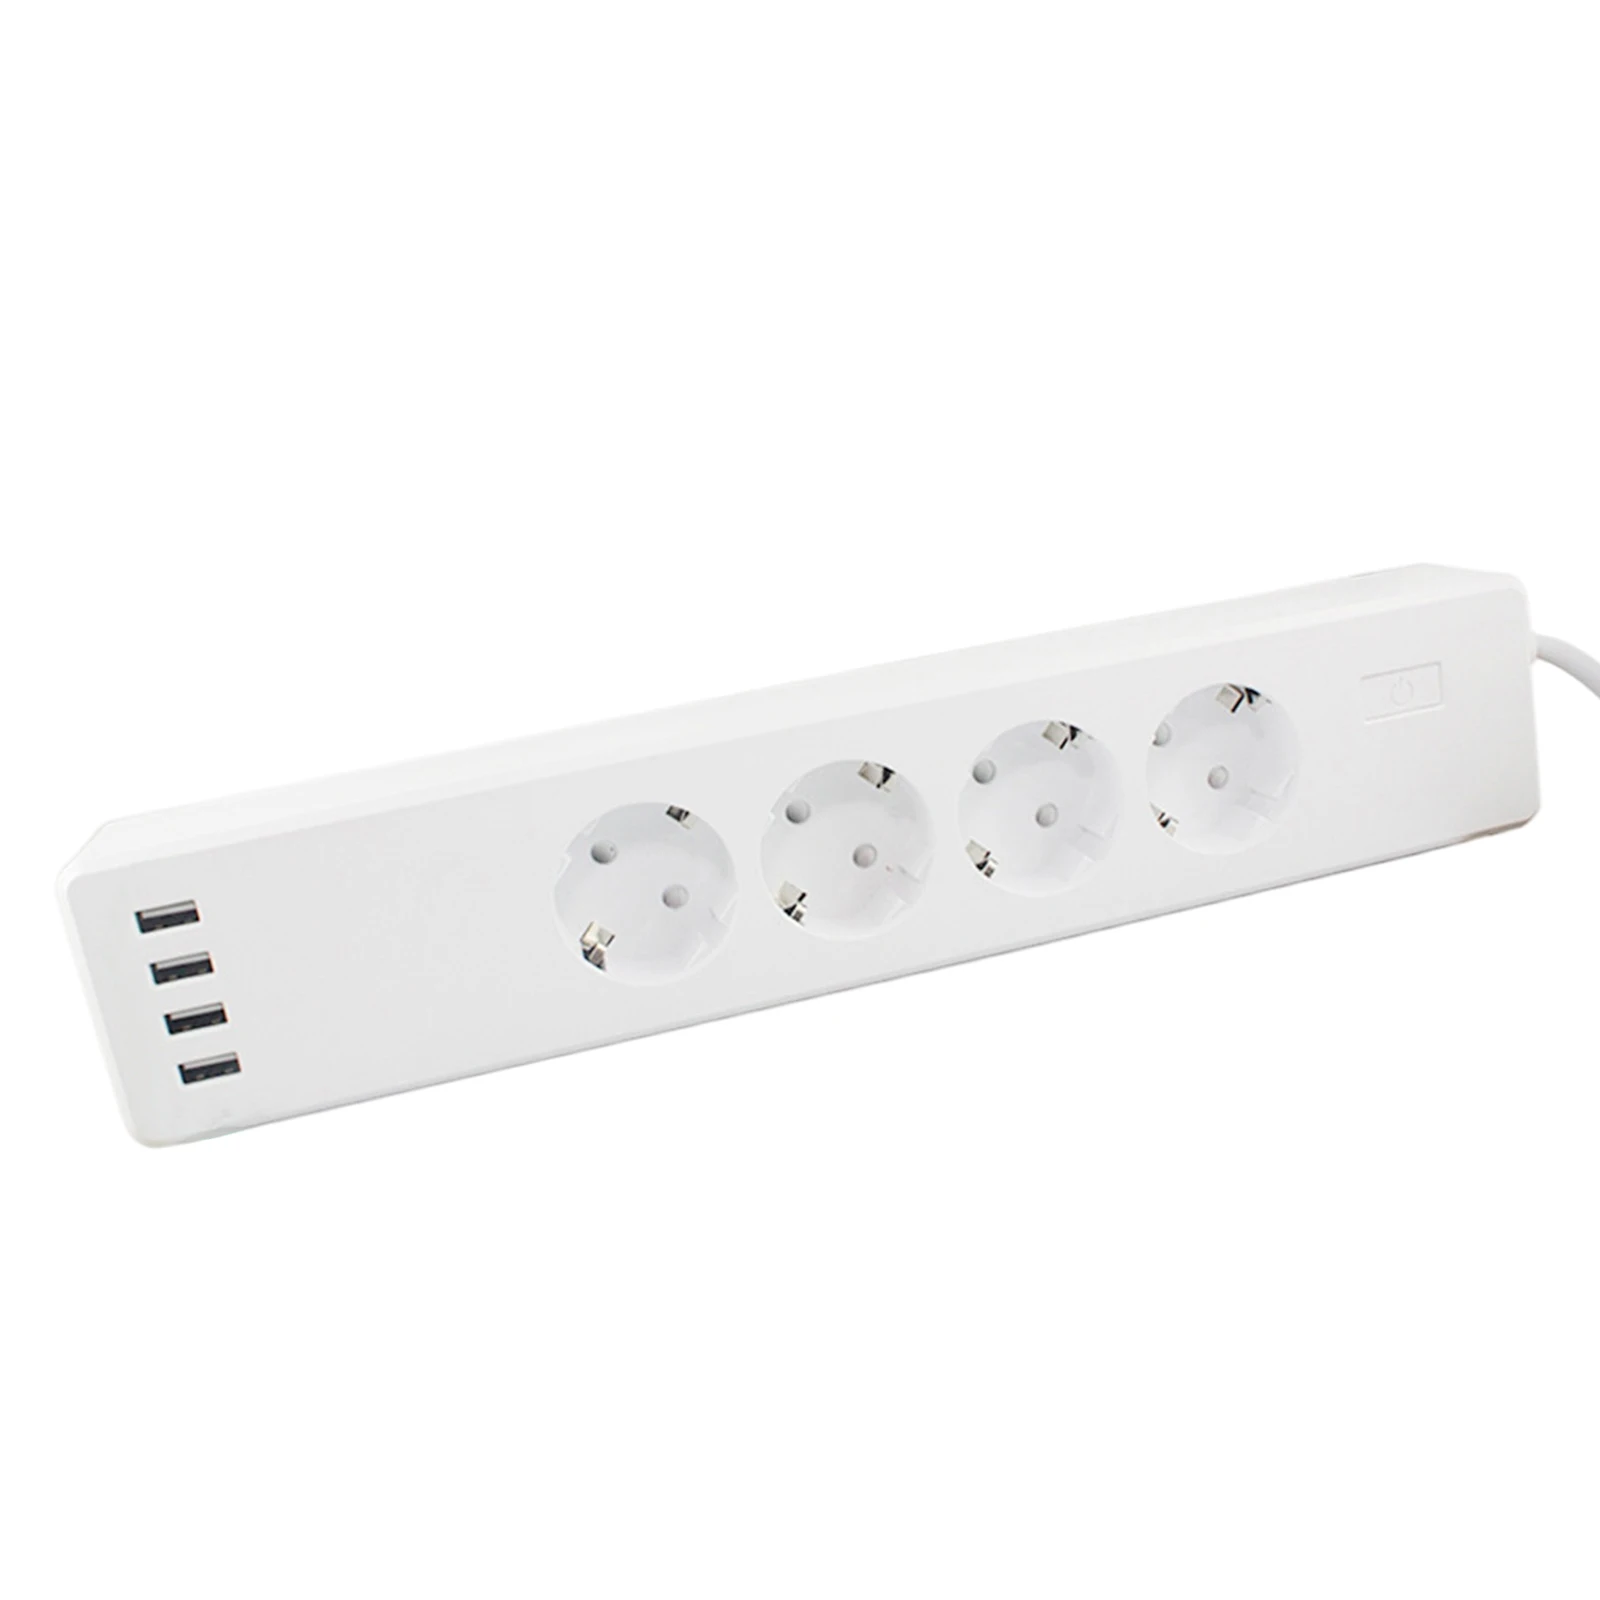 WiFi Smart Power Strip Compatible with Android Wireless 2.4G 4 USB Ports Electric Socket for Home Dormitory for Tuya App